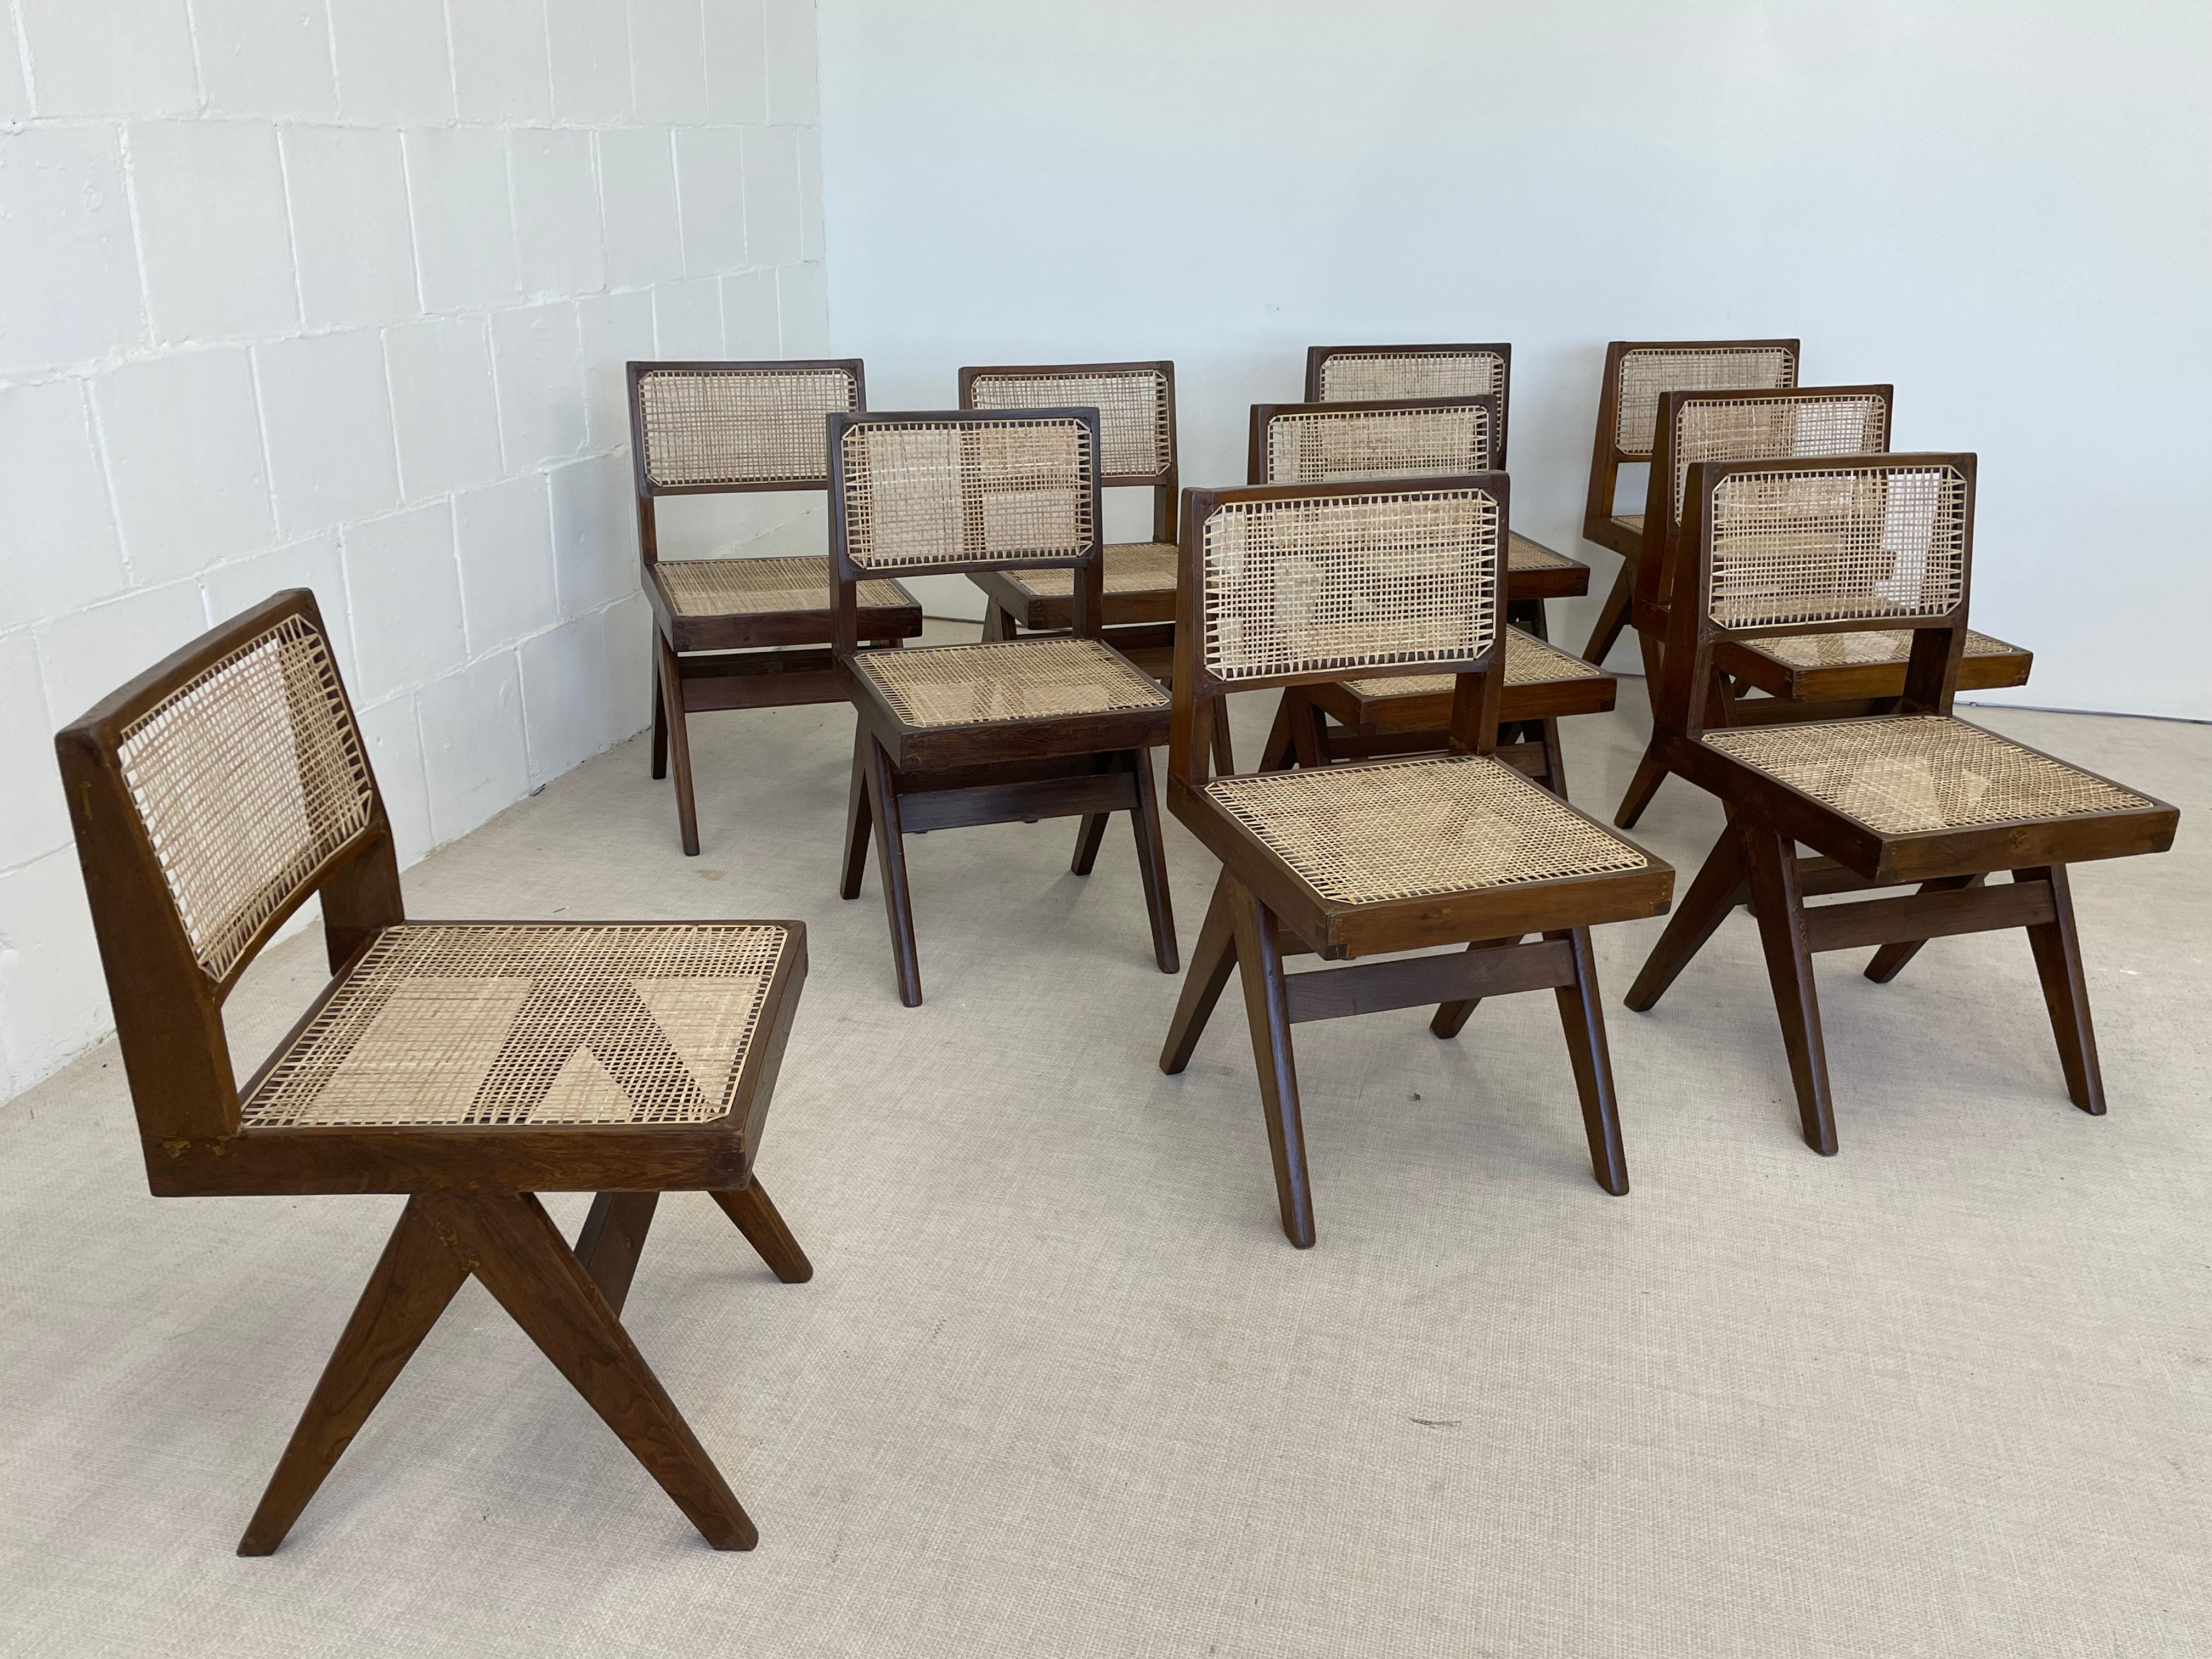 10 Pierre Jeanneret Armless Dining Chairs, Teak, Cane, France/India 5